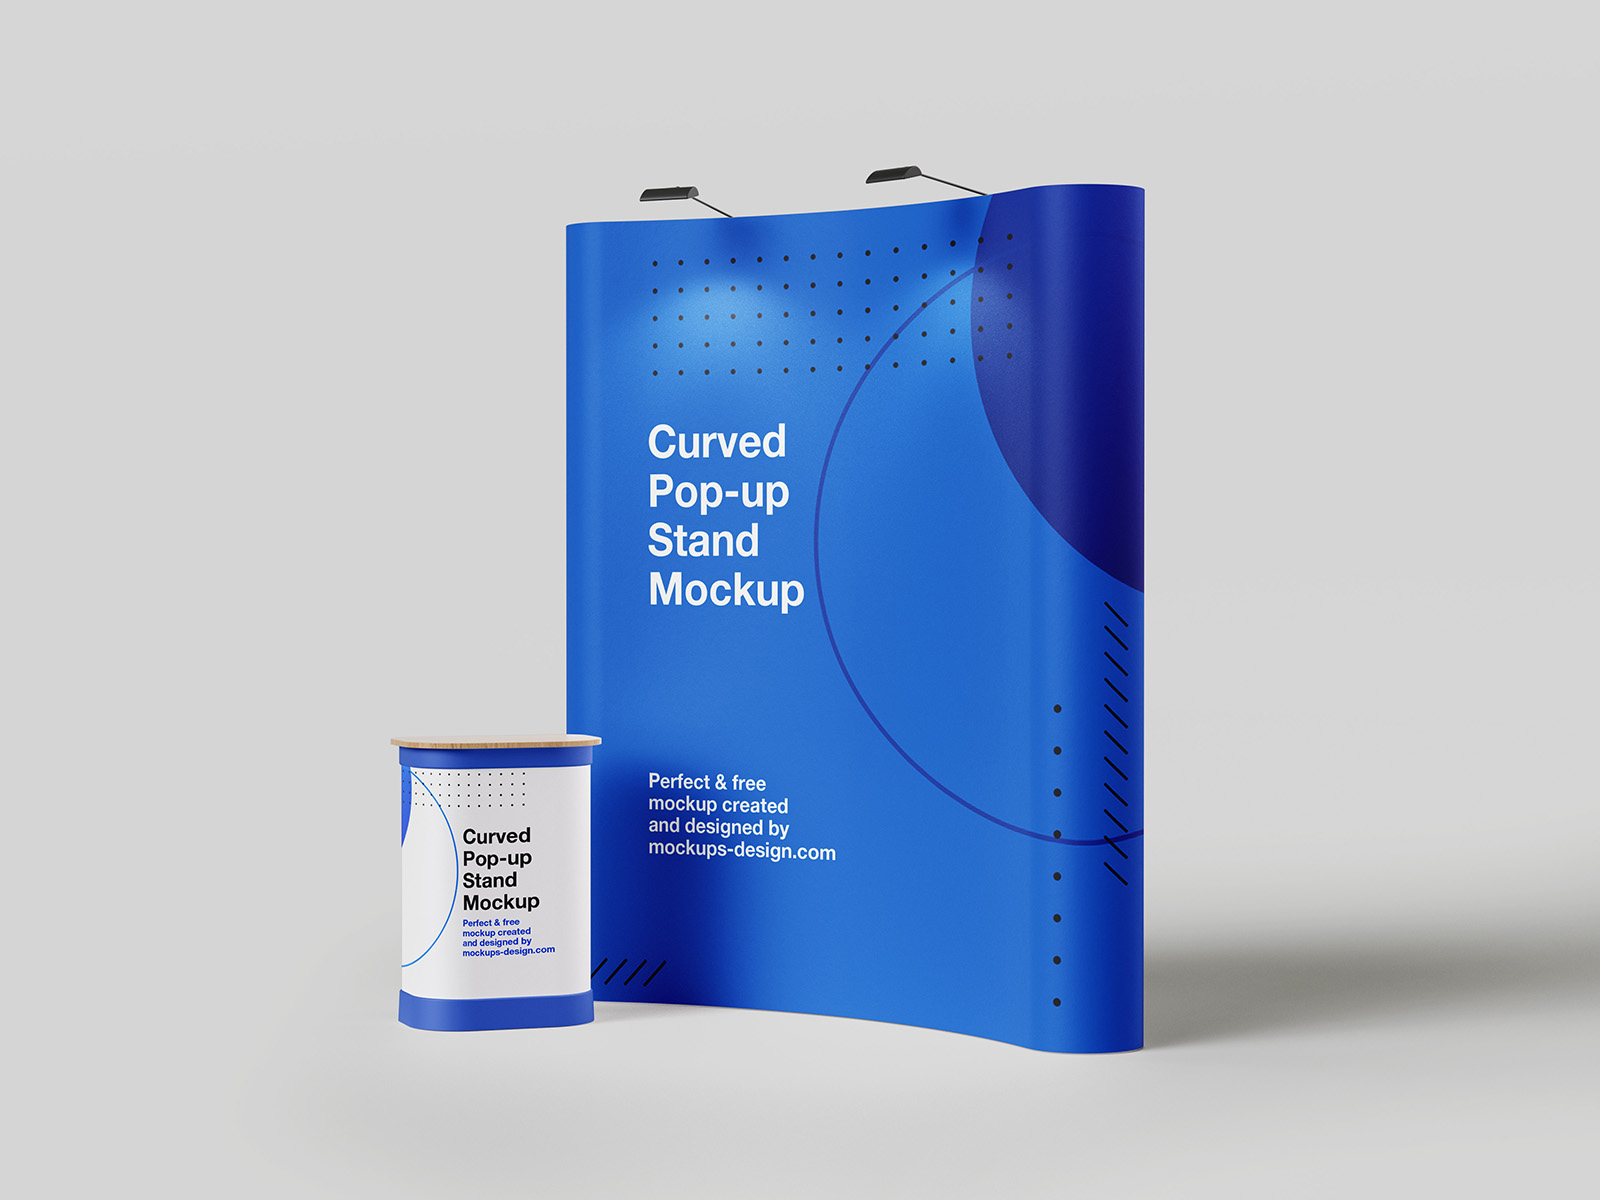 Curved pop-up stand mockup